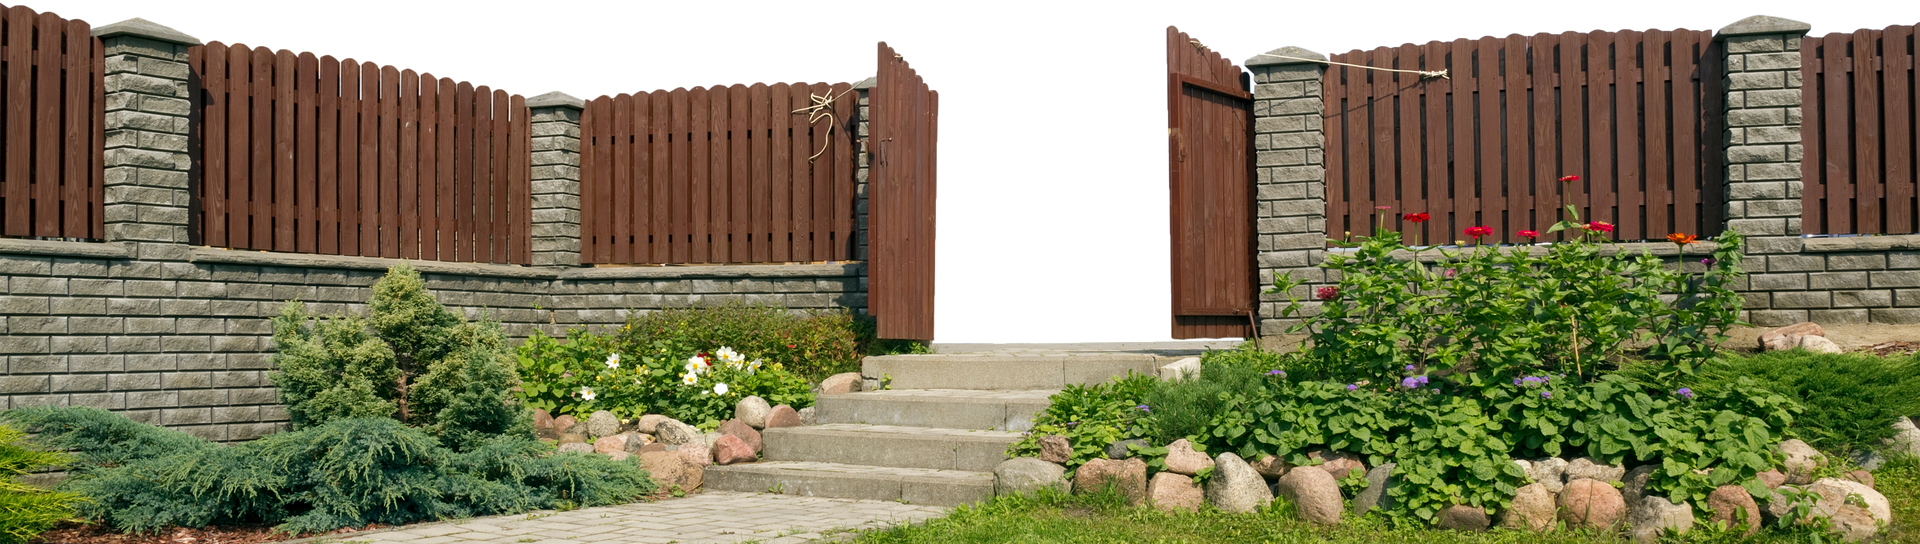 Exit from paradise concept. Open wicket in a solid wooden fence.The fence encloses a beautiful summer garden. Isolated on top with patch.